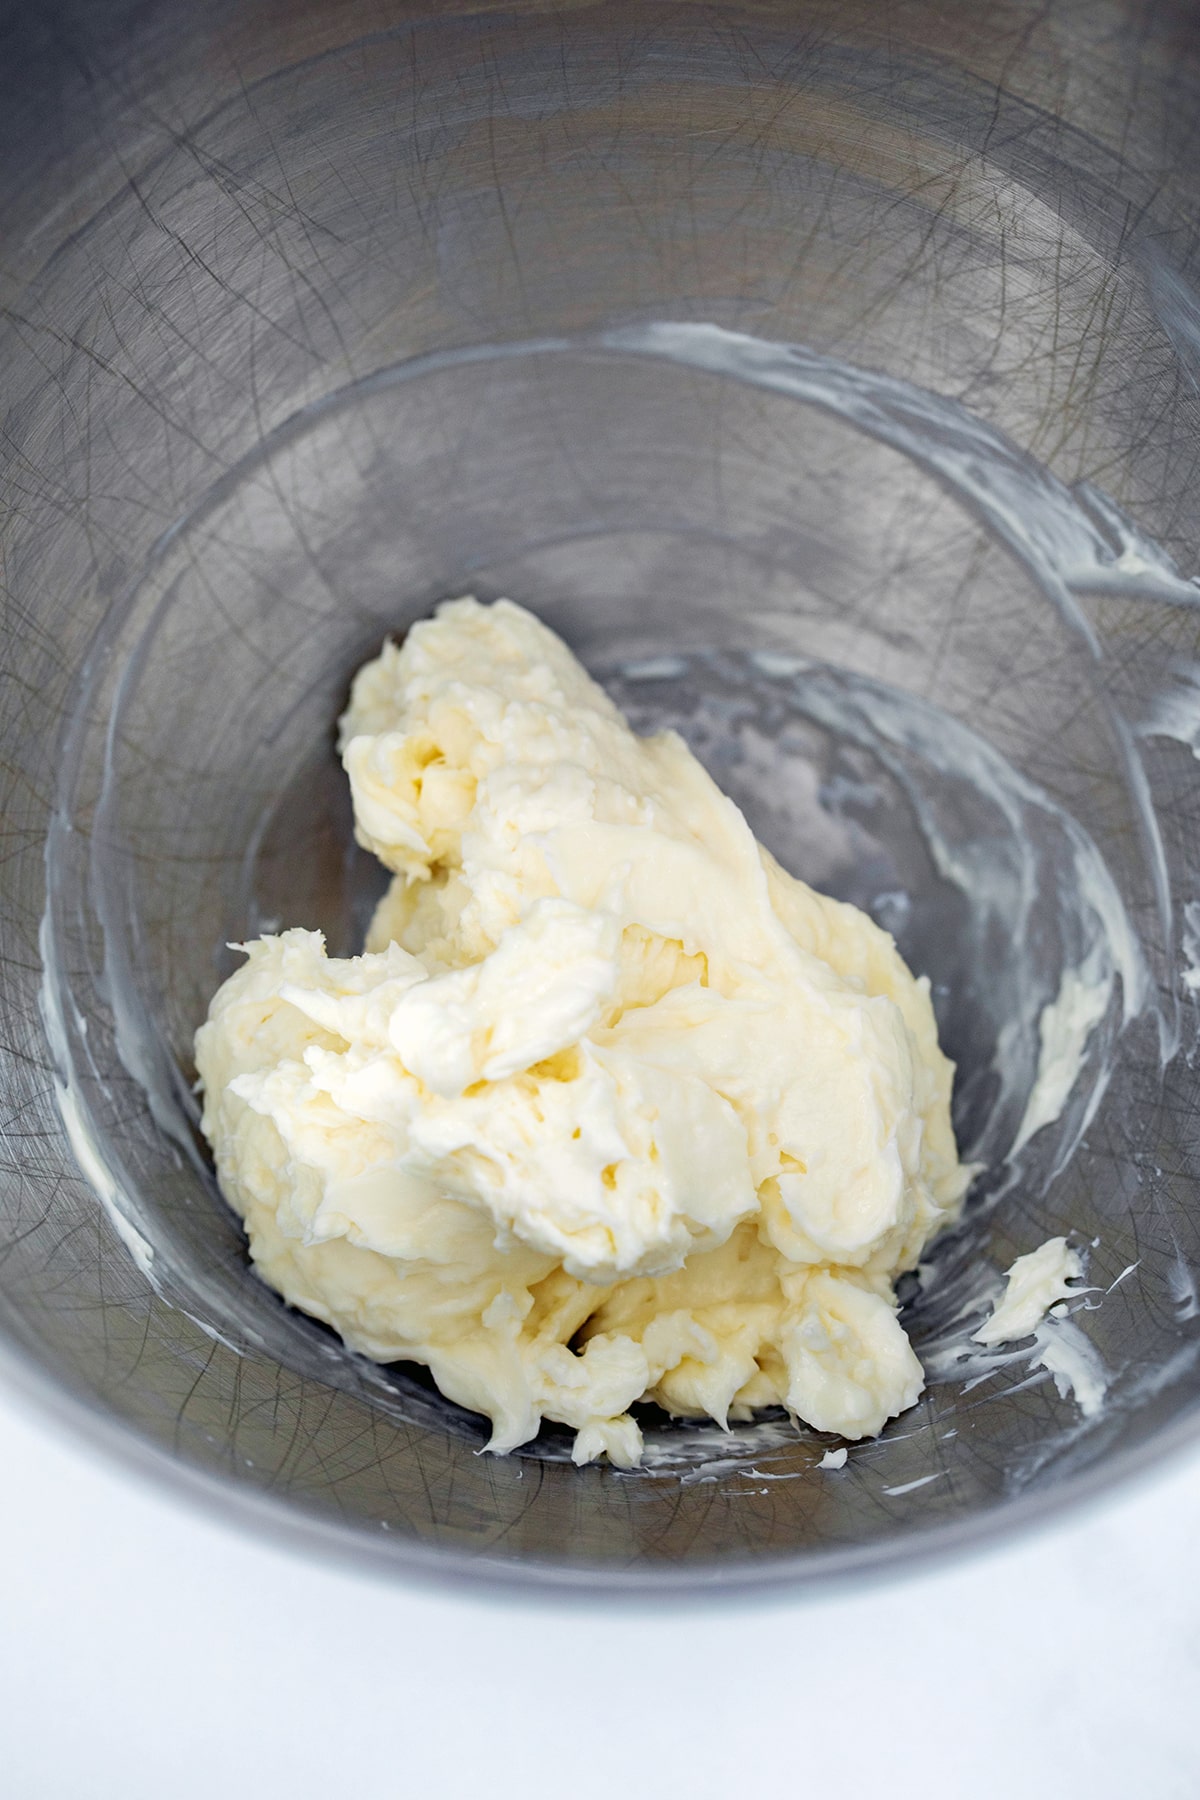 Cream cheese mixture in mixing bowl.